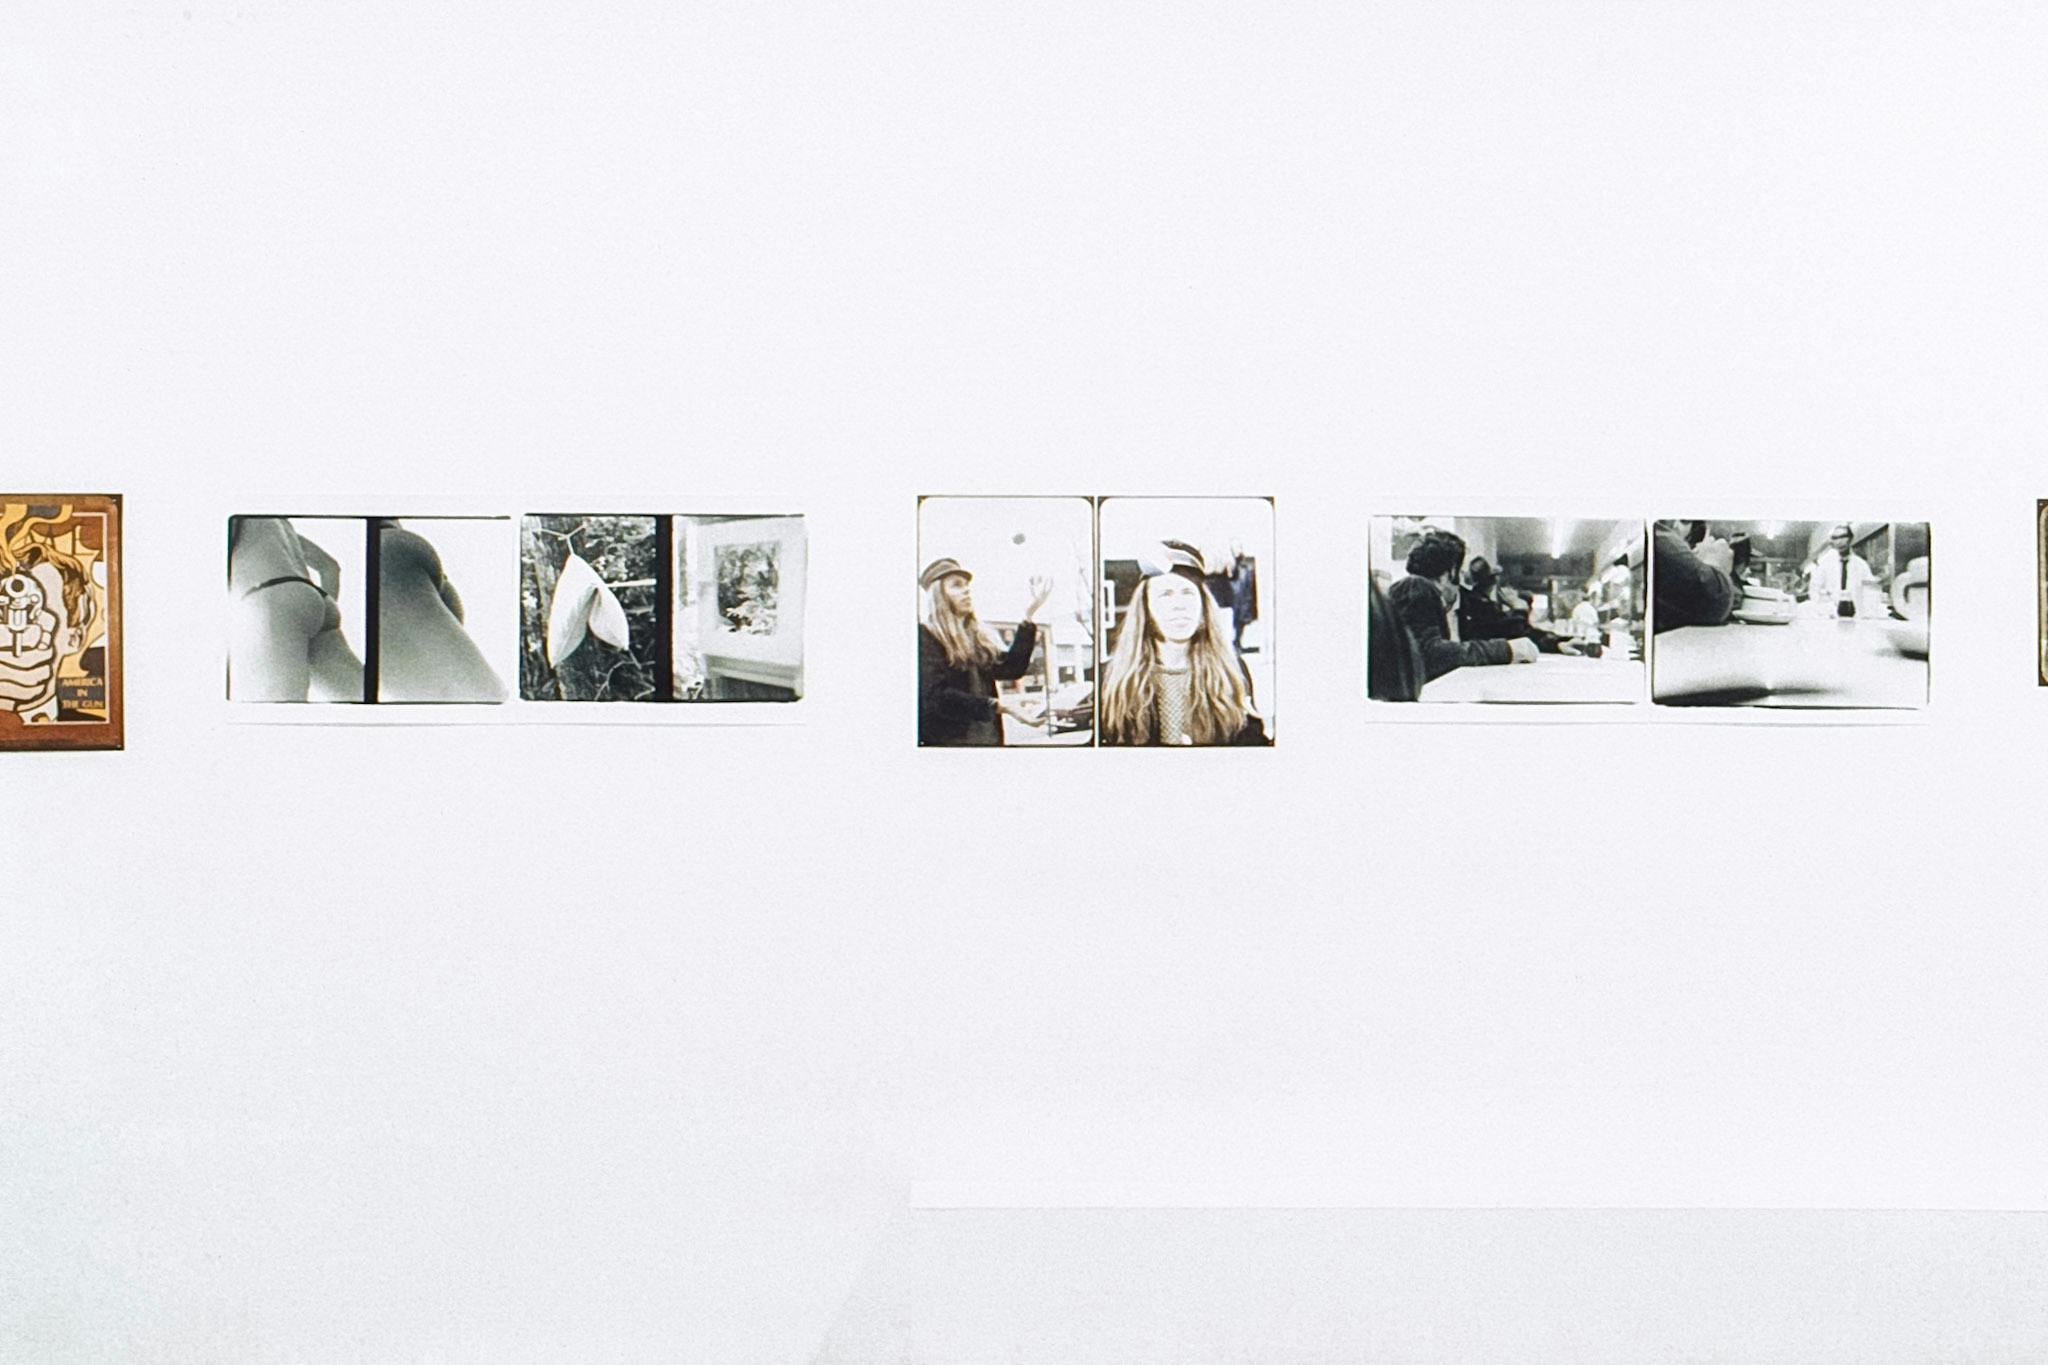 A closeup of a white wall displaying 4 sets of photos. The photos show various things, including: a bum in a thong, a hanging pillow, a person with long hair juggling, and people in a diner. 